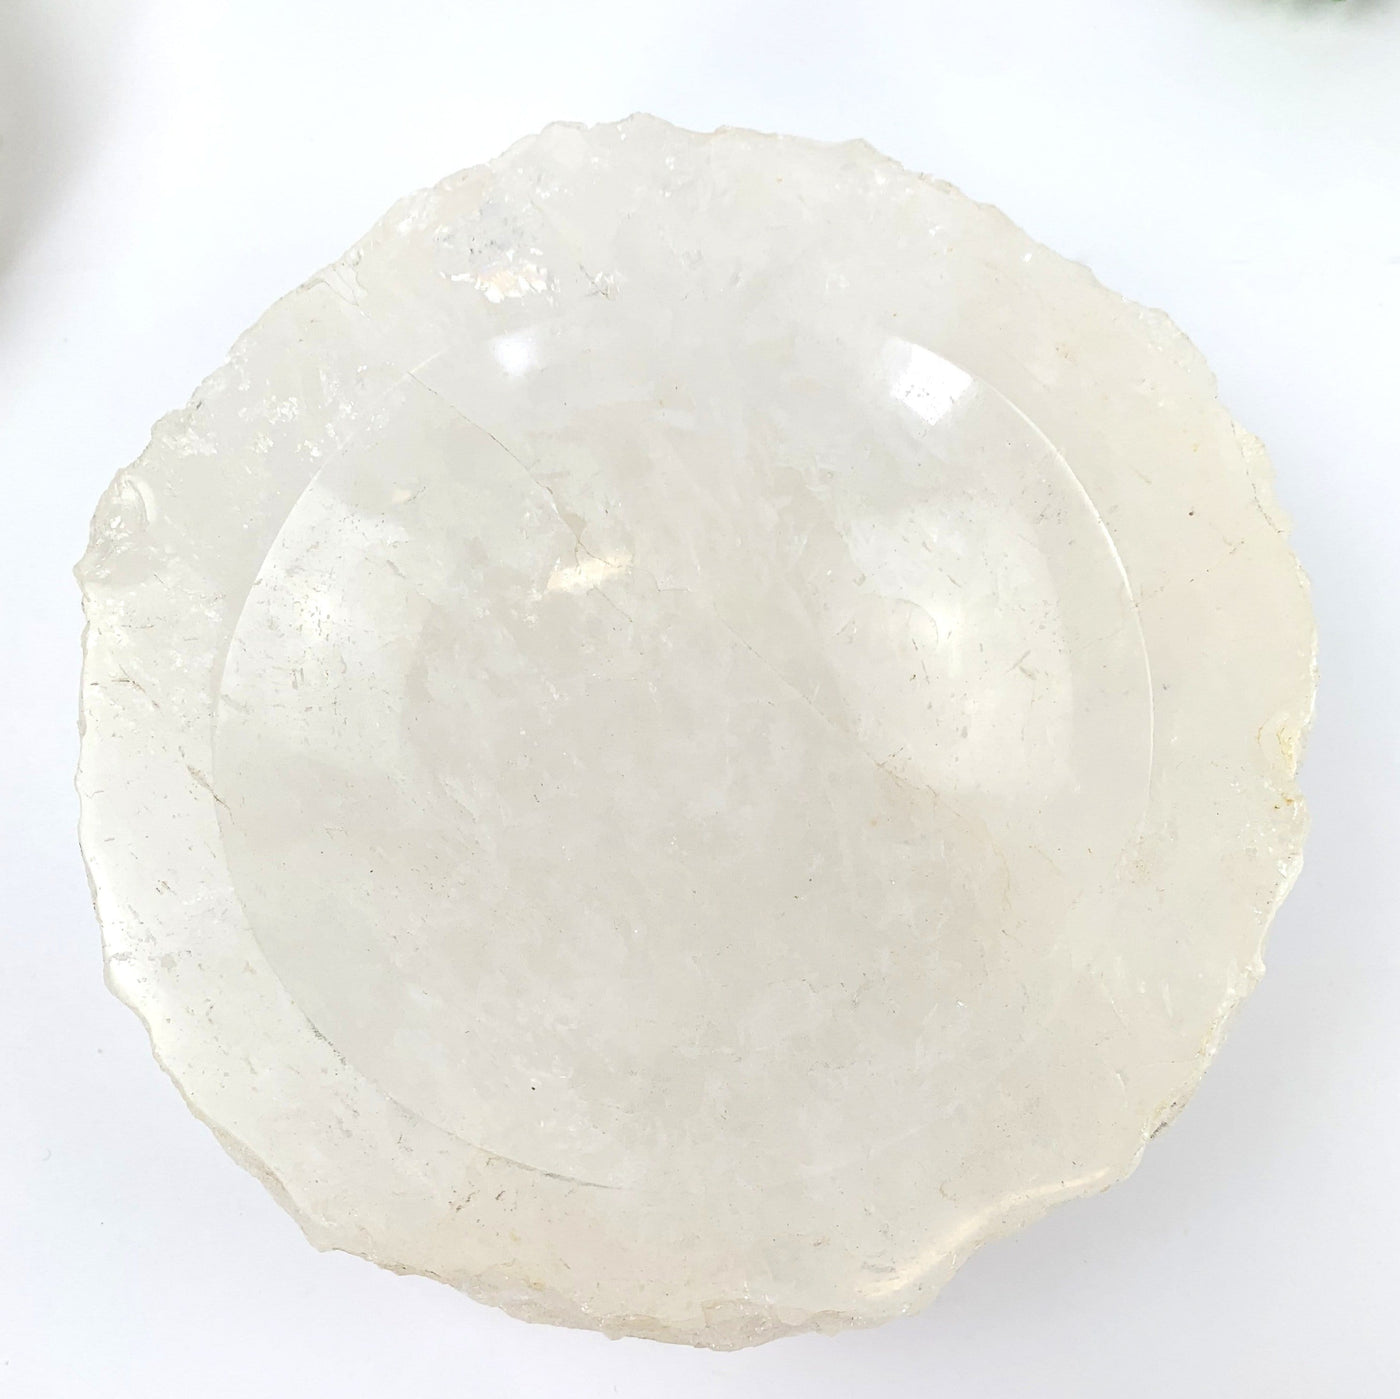 top view of Crystal Quartz Display Bowl on white background